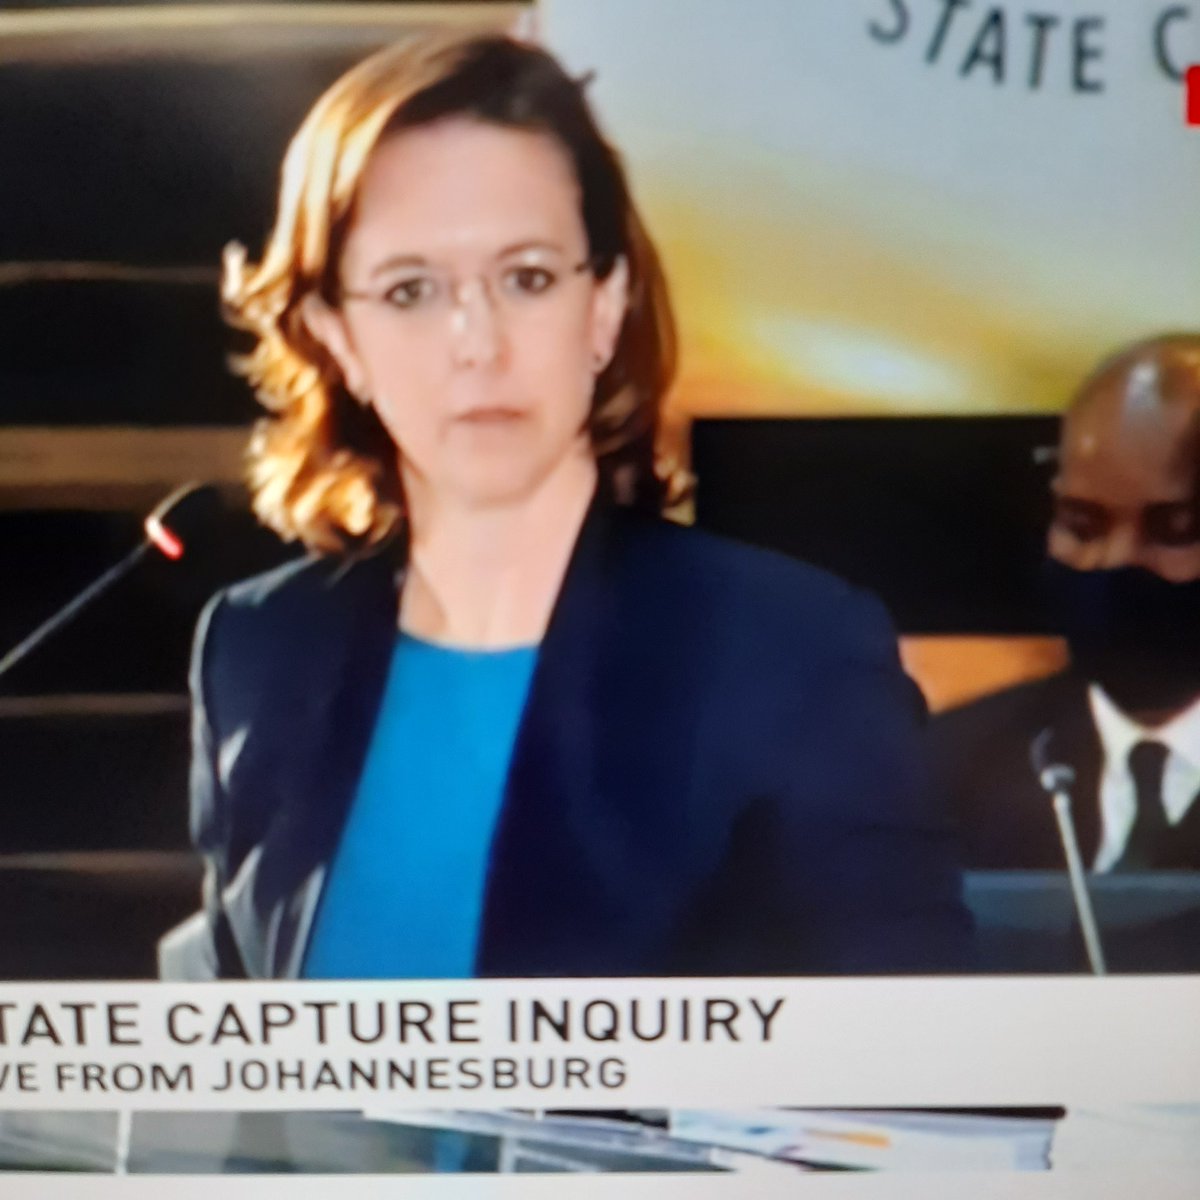 Mafuza Maya on Twitter: "Adv Kate is doing the things that makes the business man to forget everything. #StateCaptureInquiry https://t.co/E6VKvjId2r" / Twitter